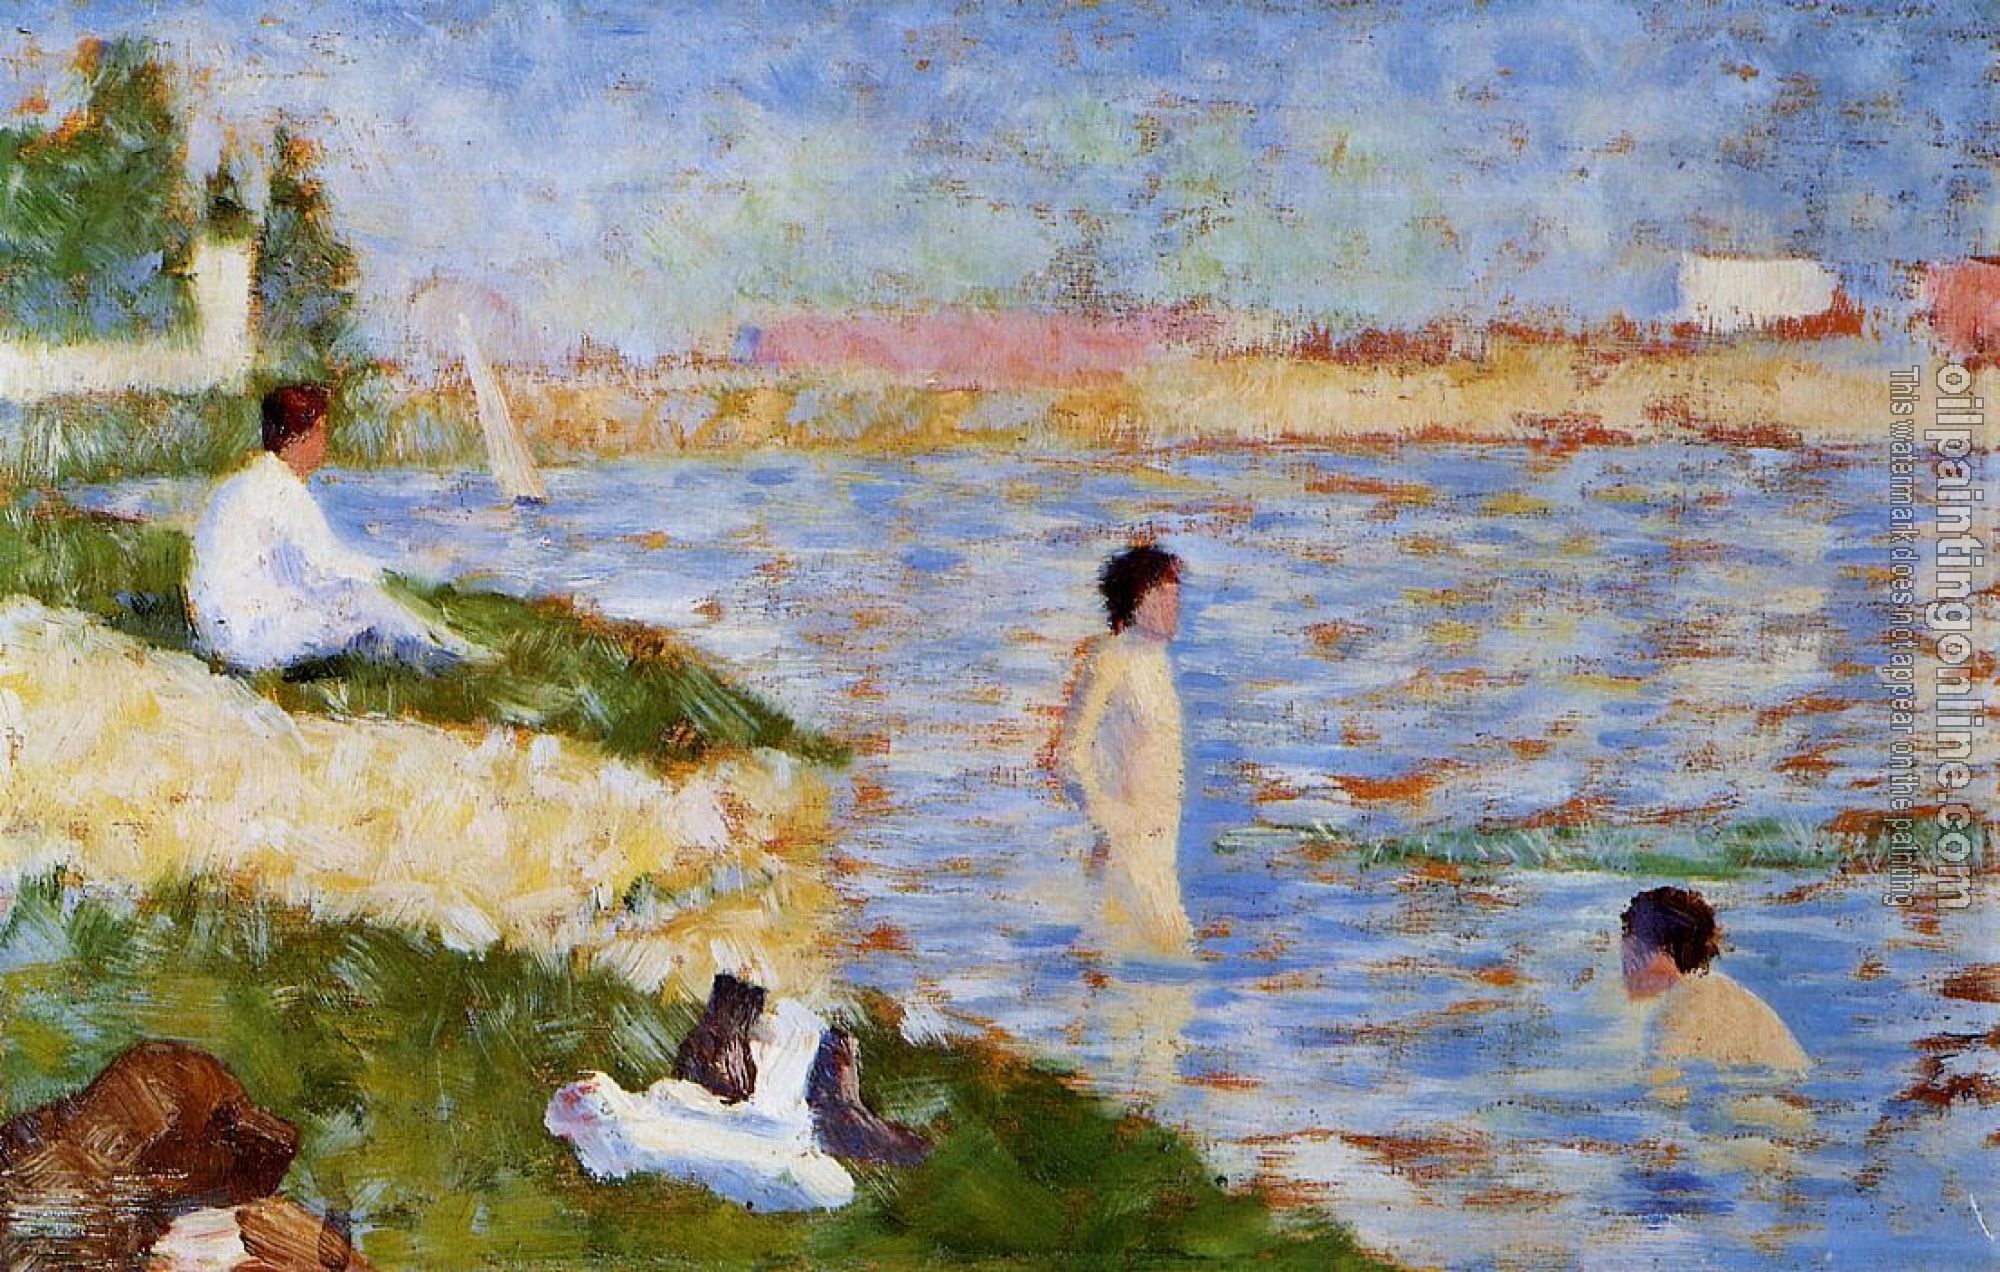 Seurat, Georges - Bathing at Asnieres, Bathers in the Water